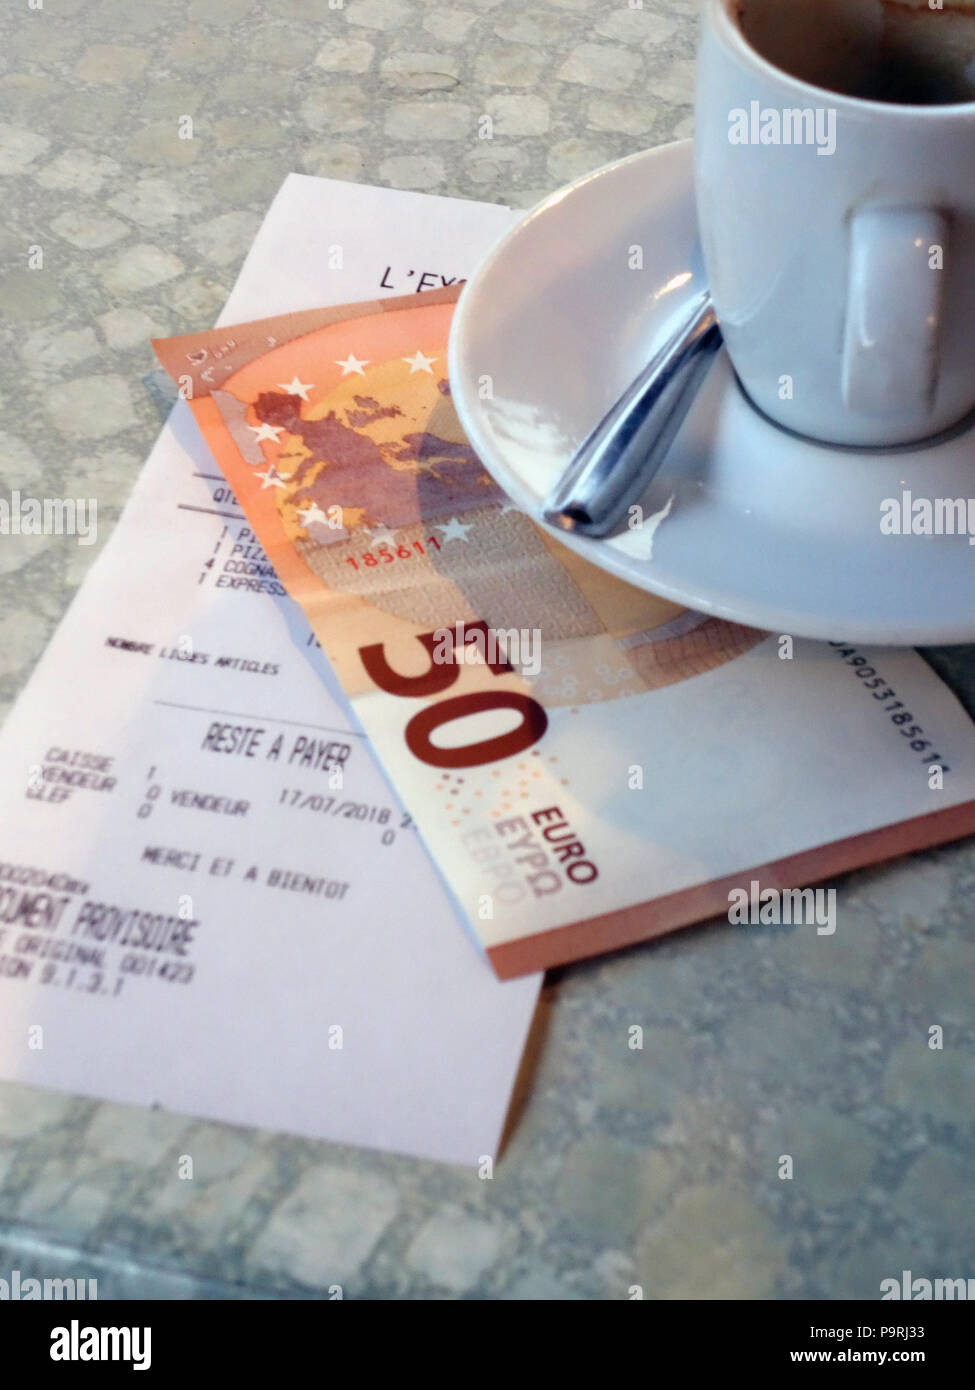 The bill is presented with coffee after dinner in a restaurant in Magalas, Herault, South of France Stock Photo